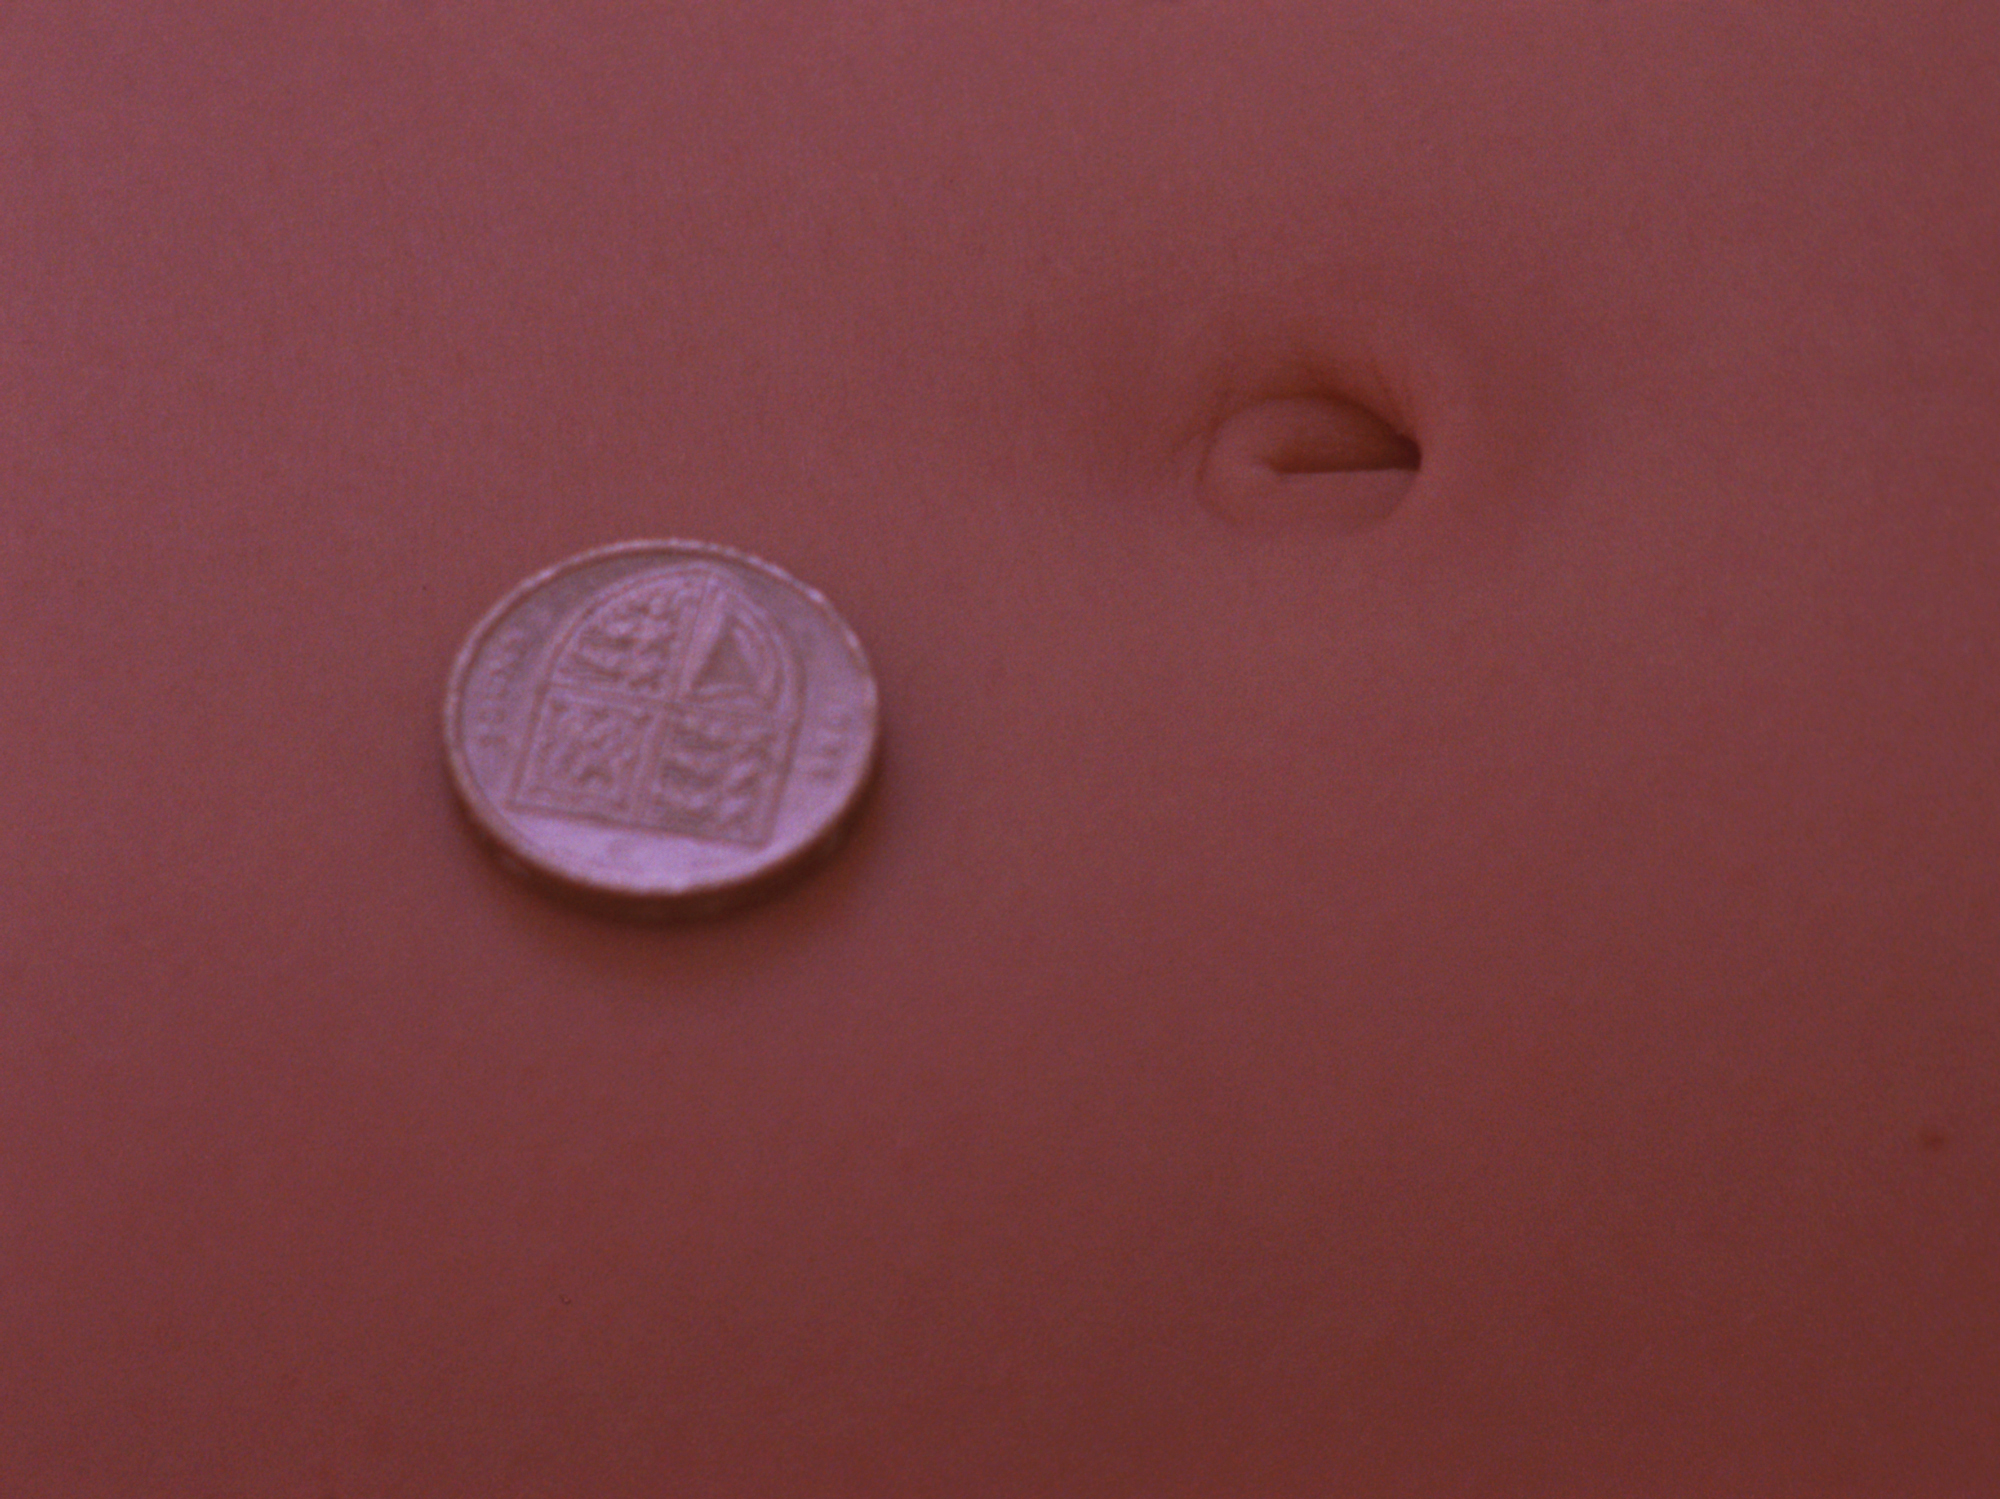 Film still: coin and bellybutton